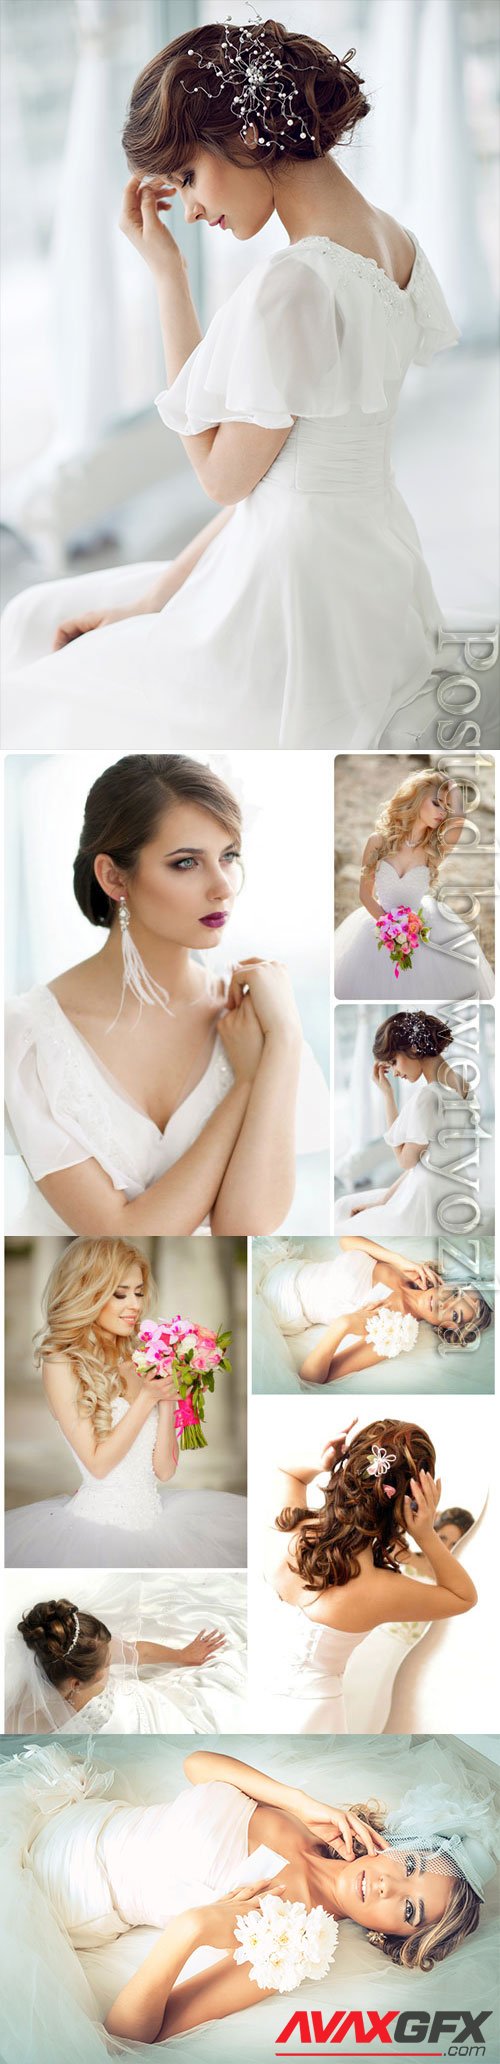 Adorable brides with wedding bouquets stock photo